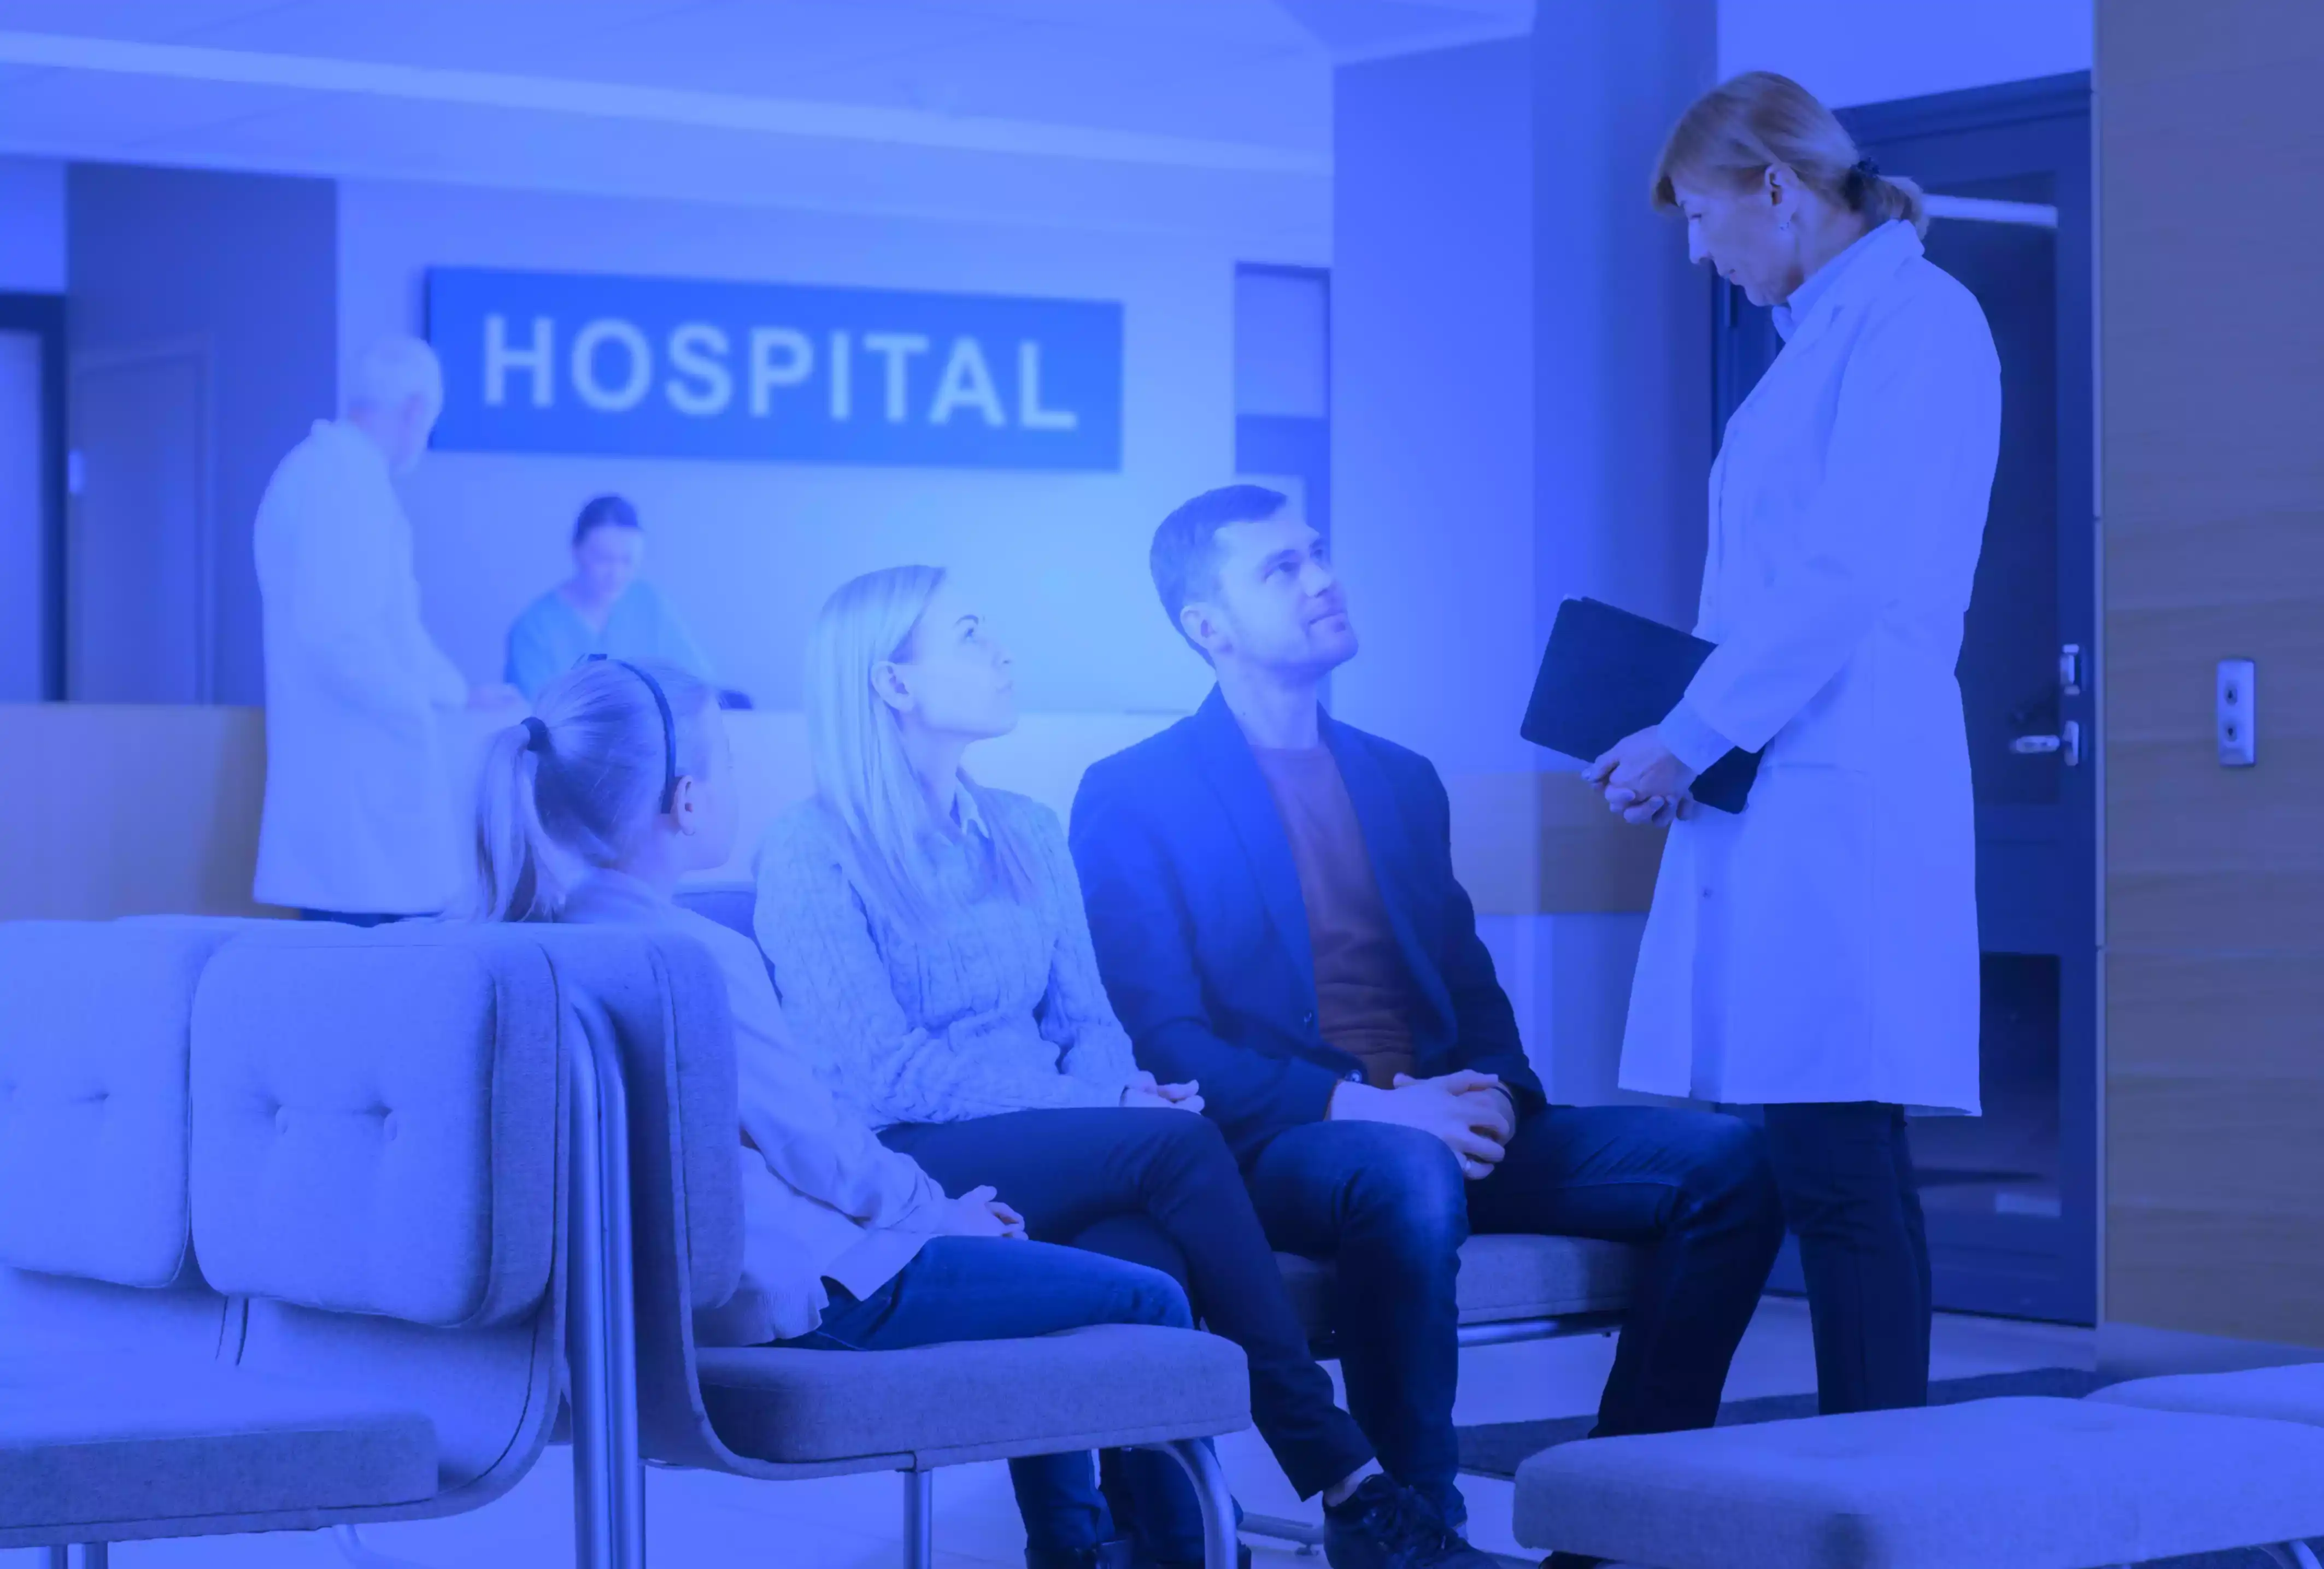 Patient Feedback Kiosks: Improving Healthcare Experiences and Operations